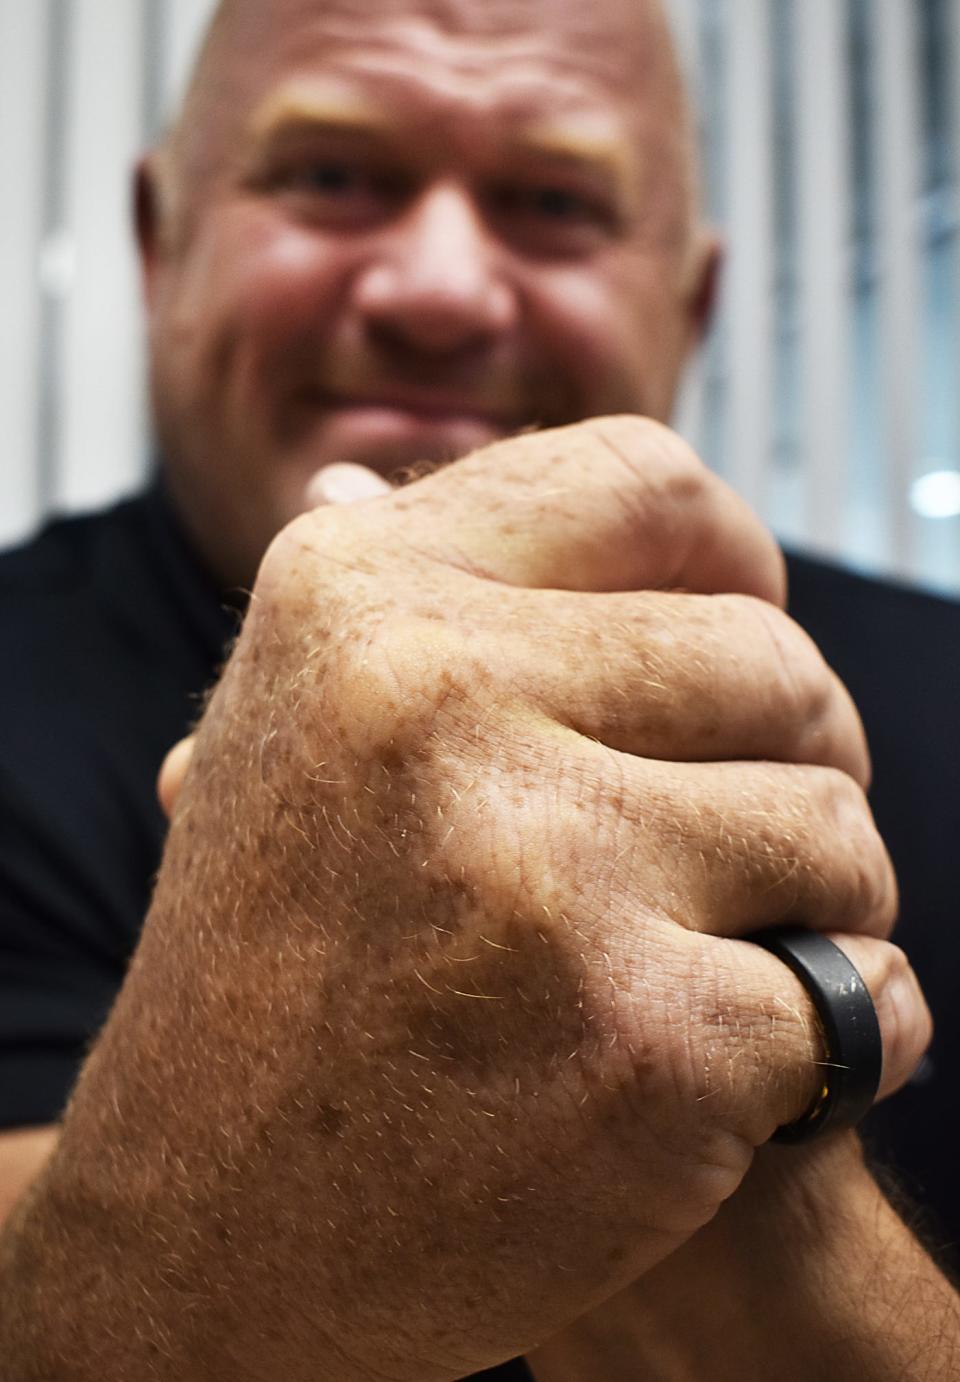 At 50, Jerry Cadorette says he knows his arm-wrestling career won't last forever. Still, "I’ve built a pretty cool legacy," he says.